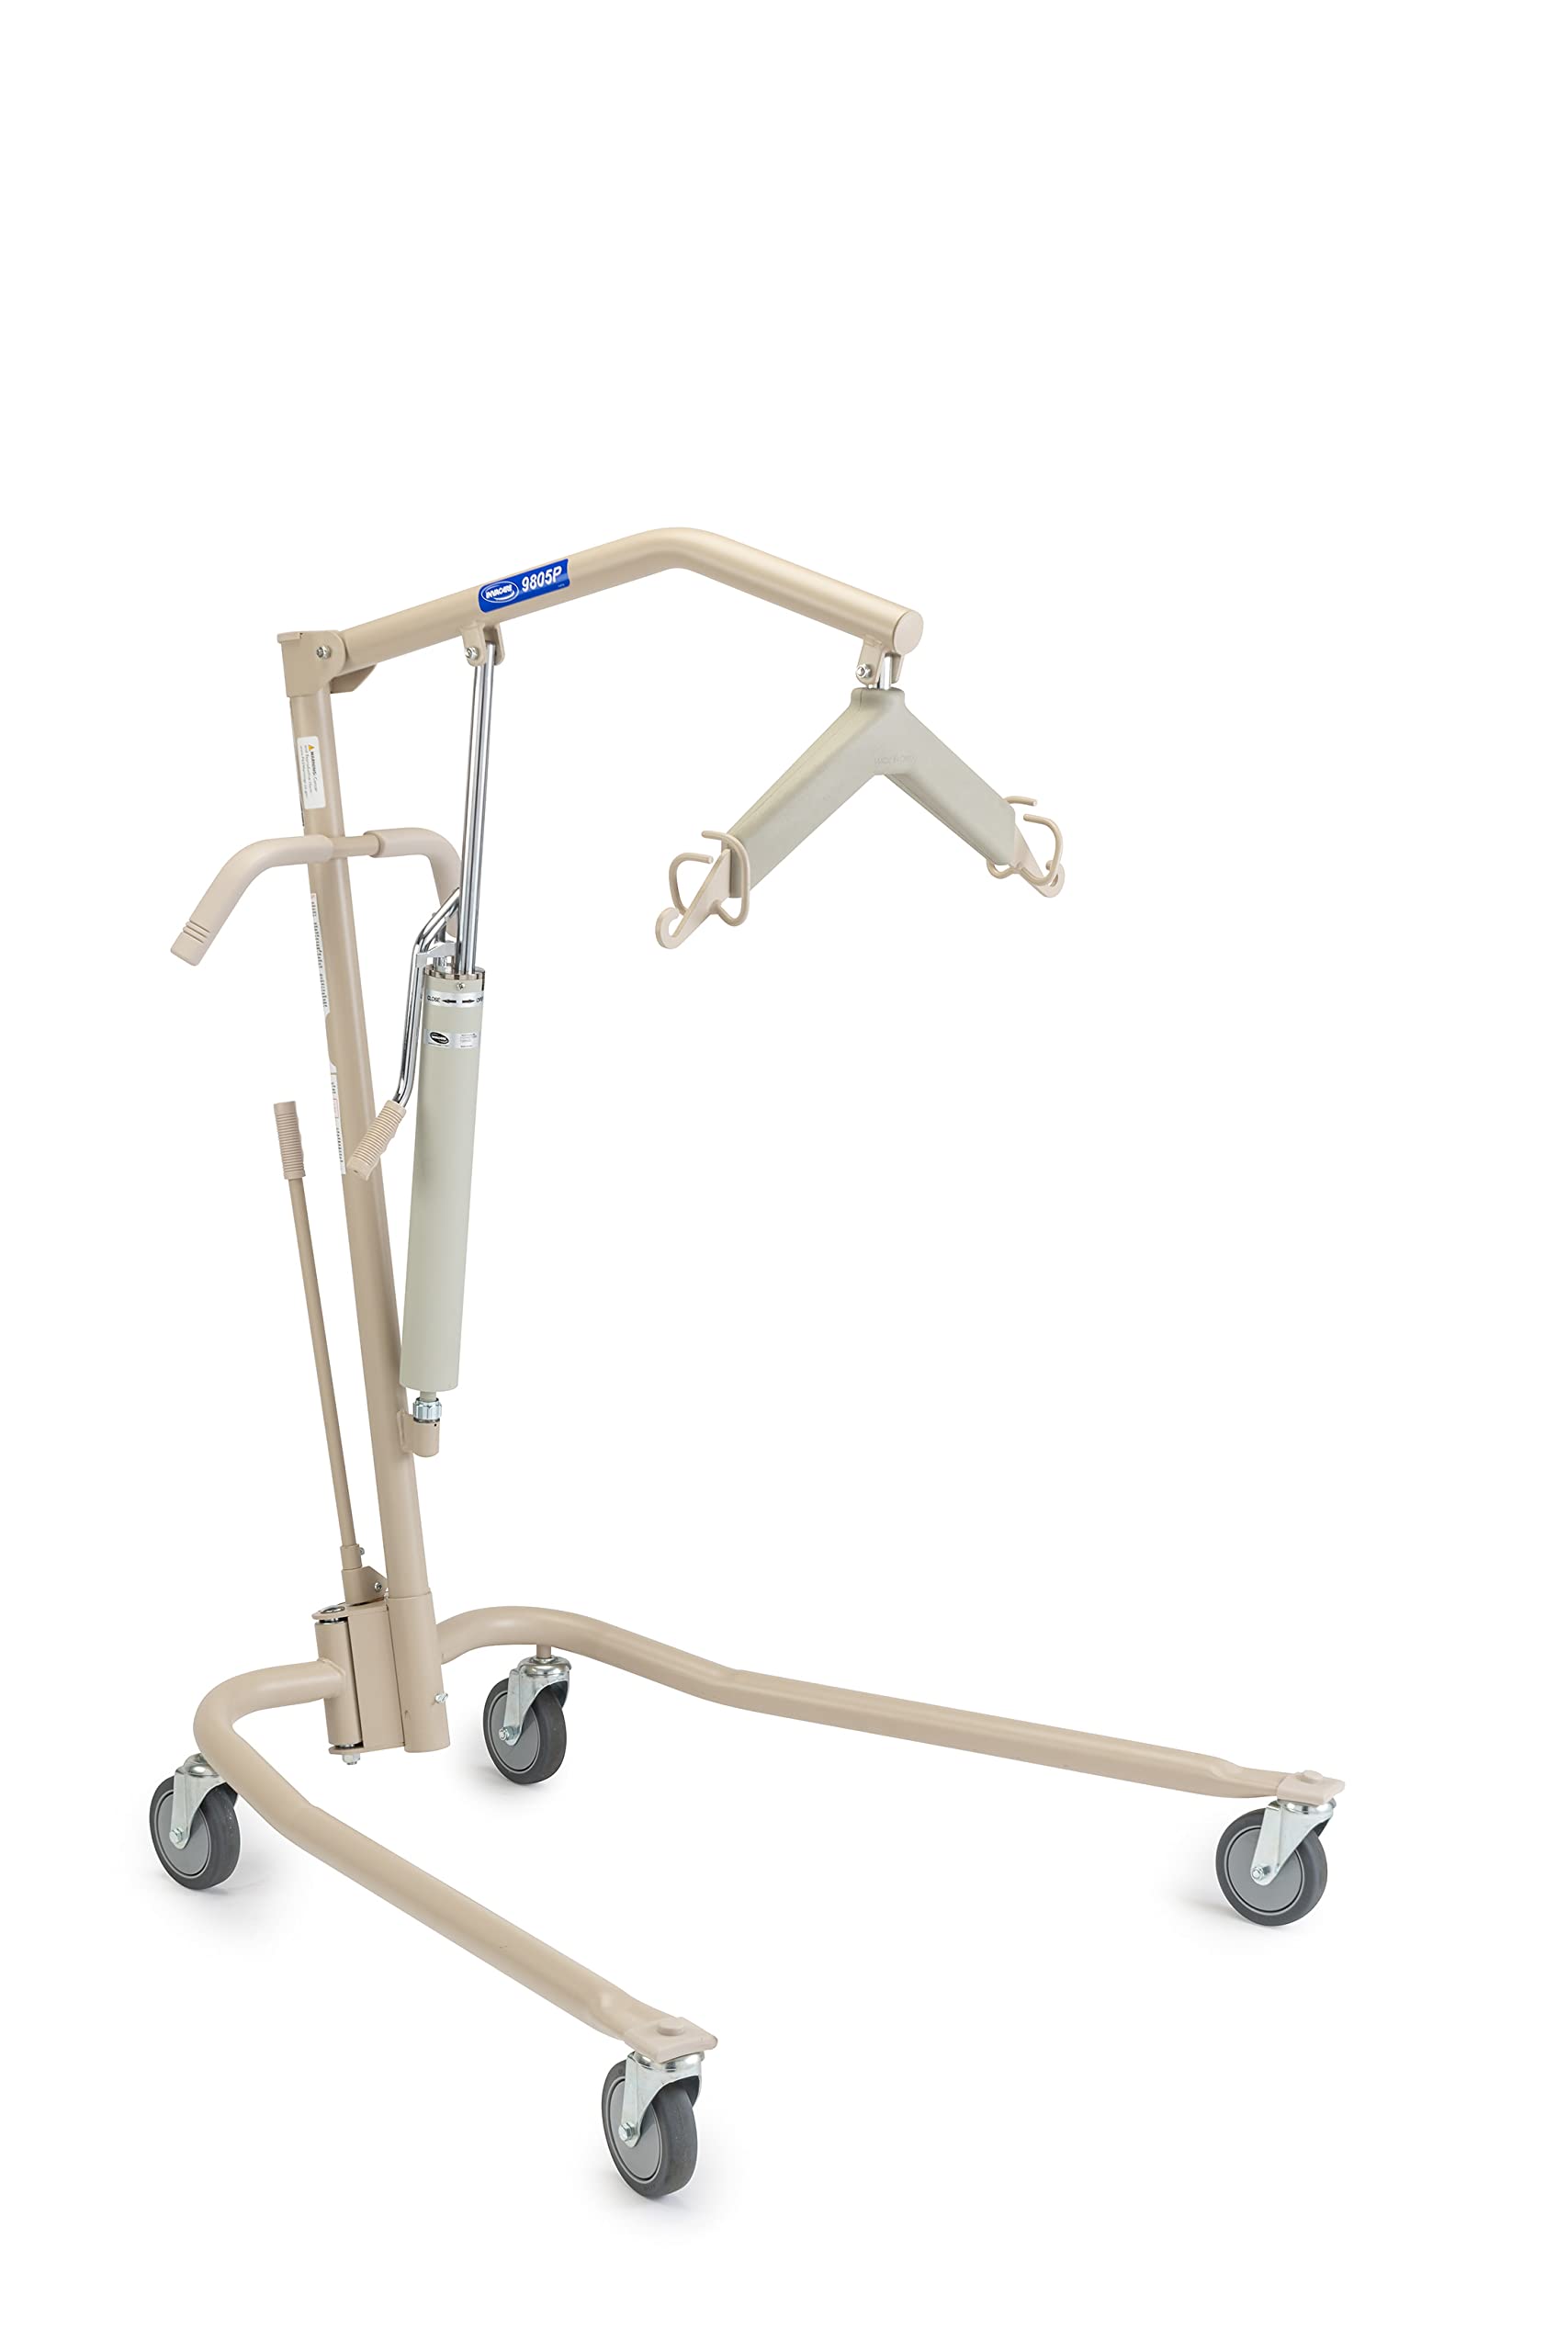 Invacare Lightweight Hydraulic Patient Lift, Beige, 450 lb. Weight Capacity, 9805P